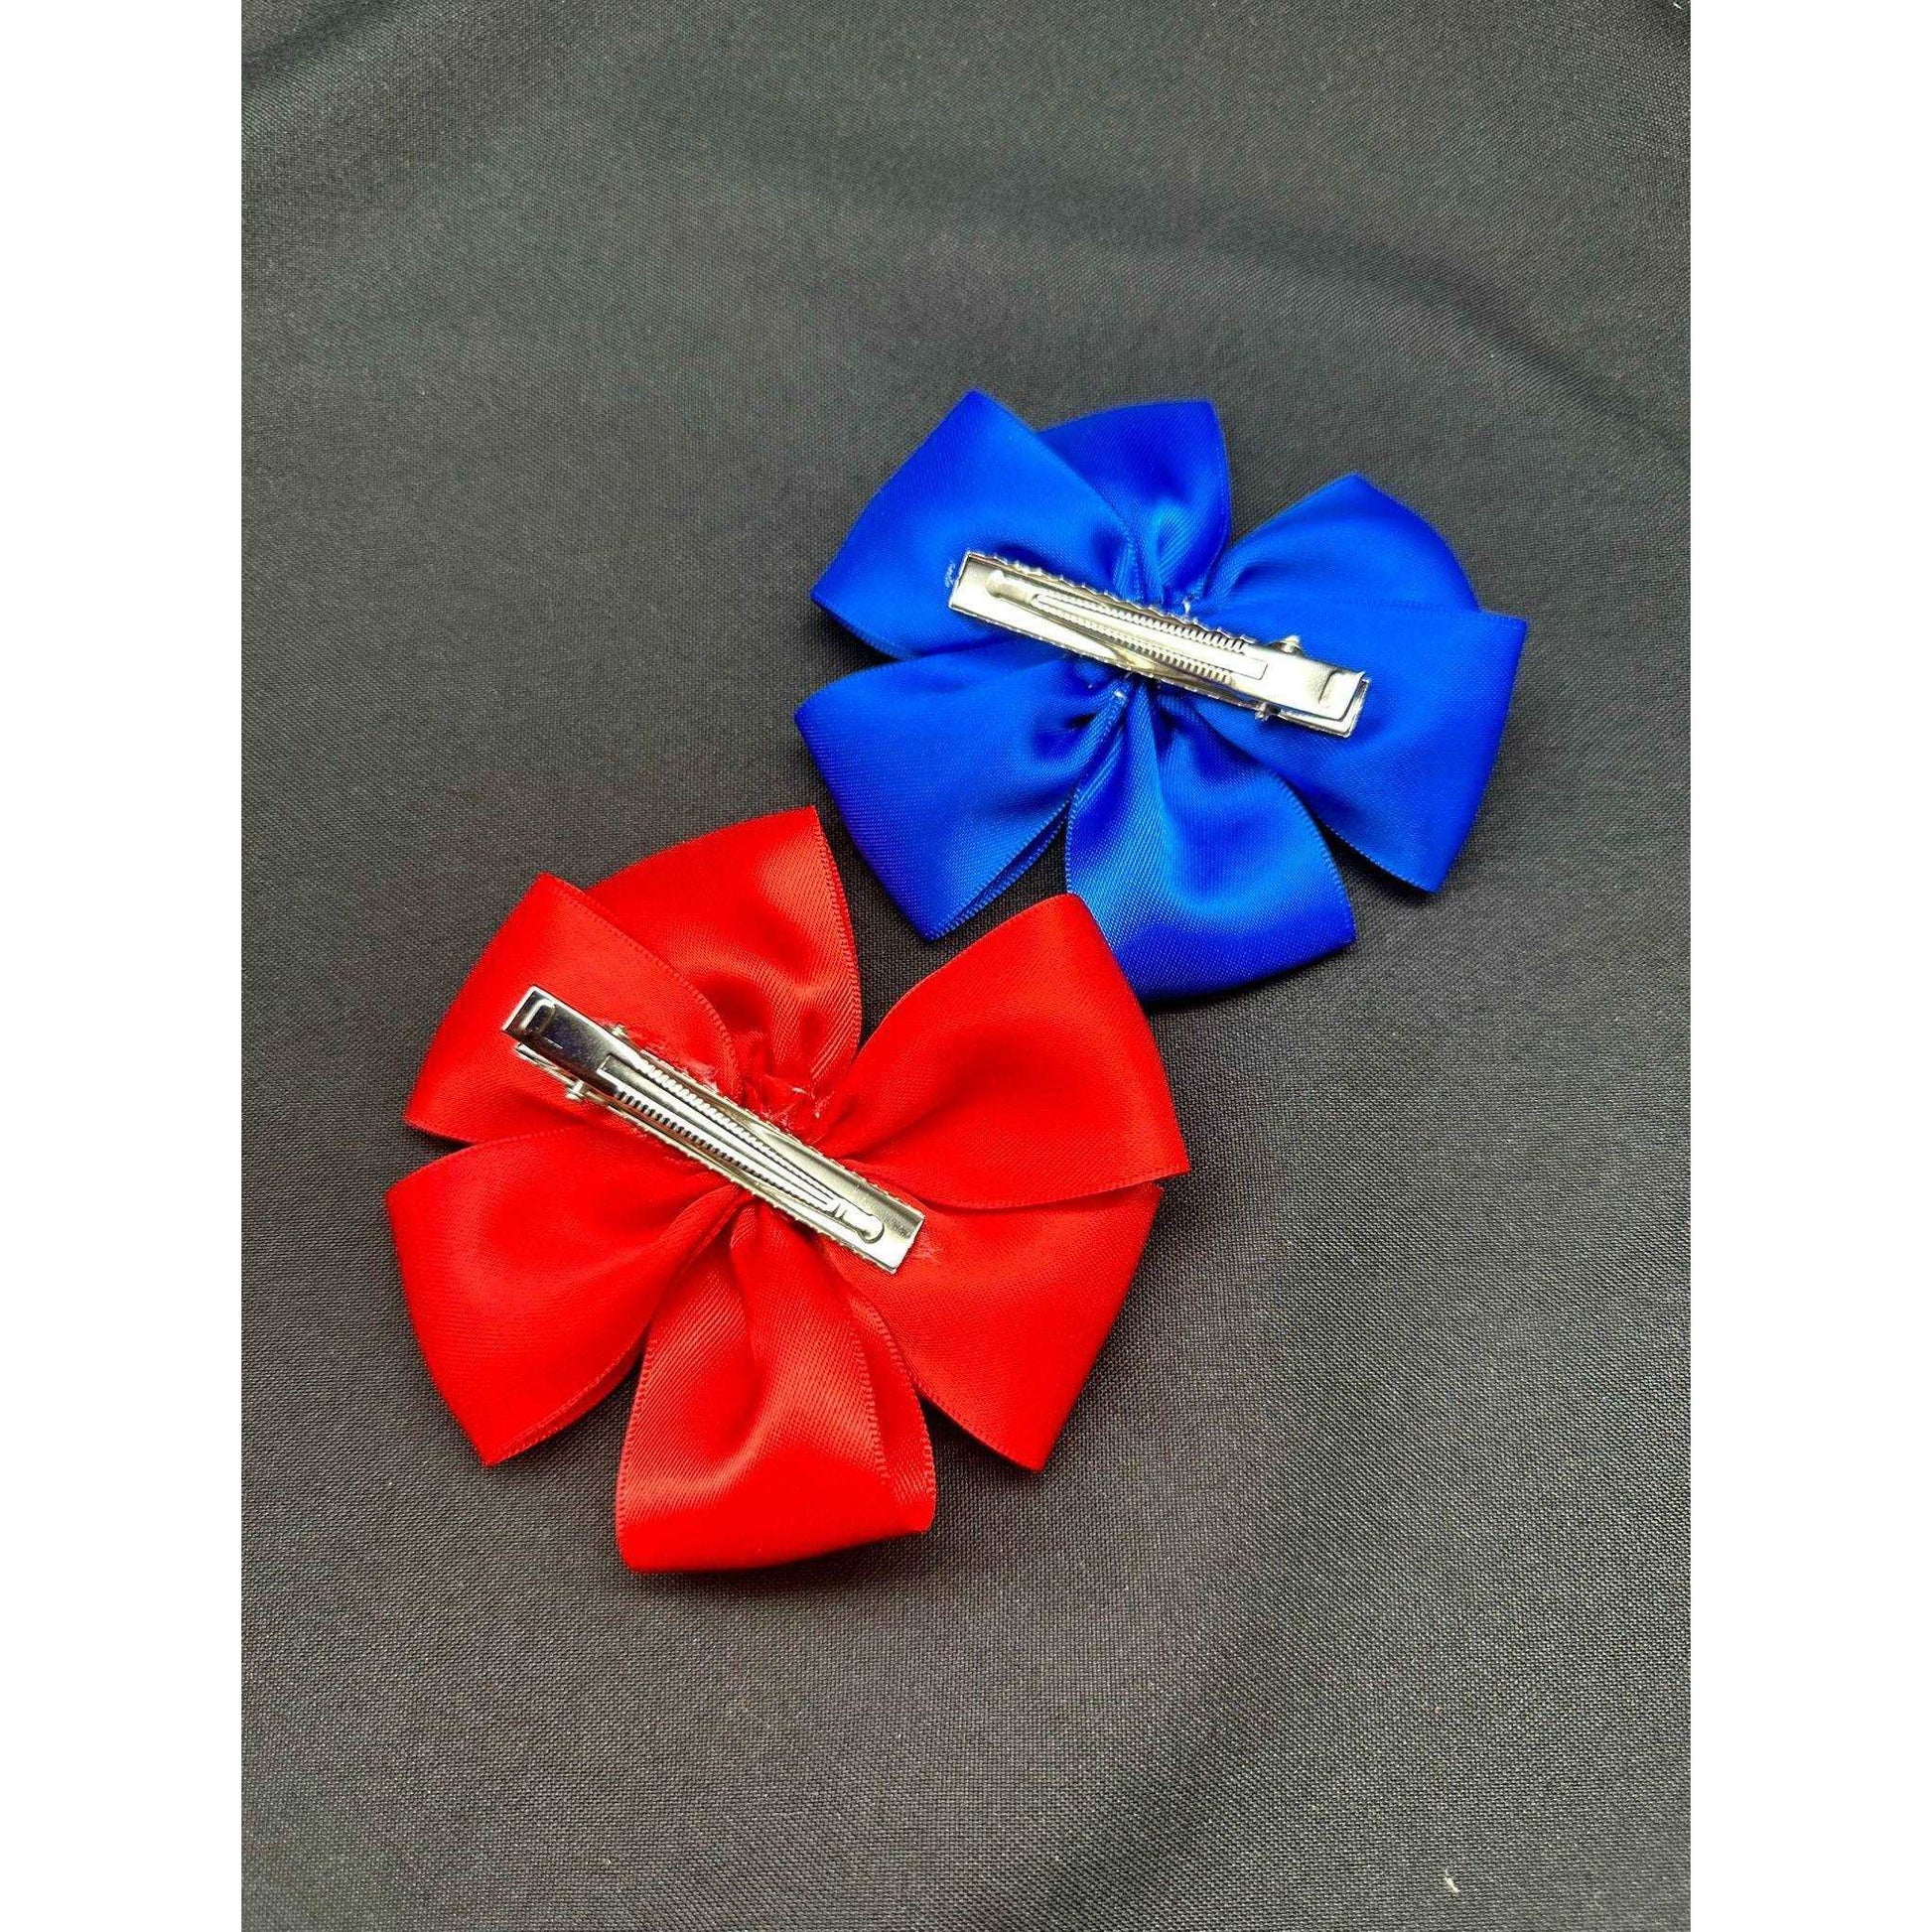 a pair of red scissors on a blue cloth 